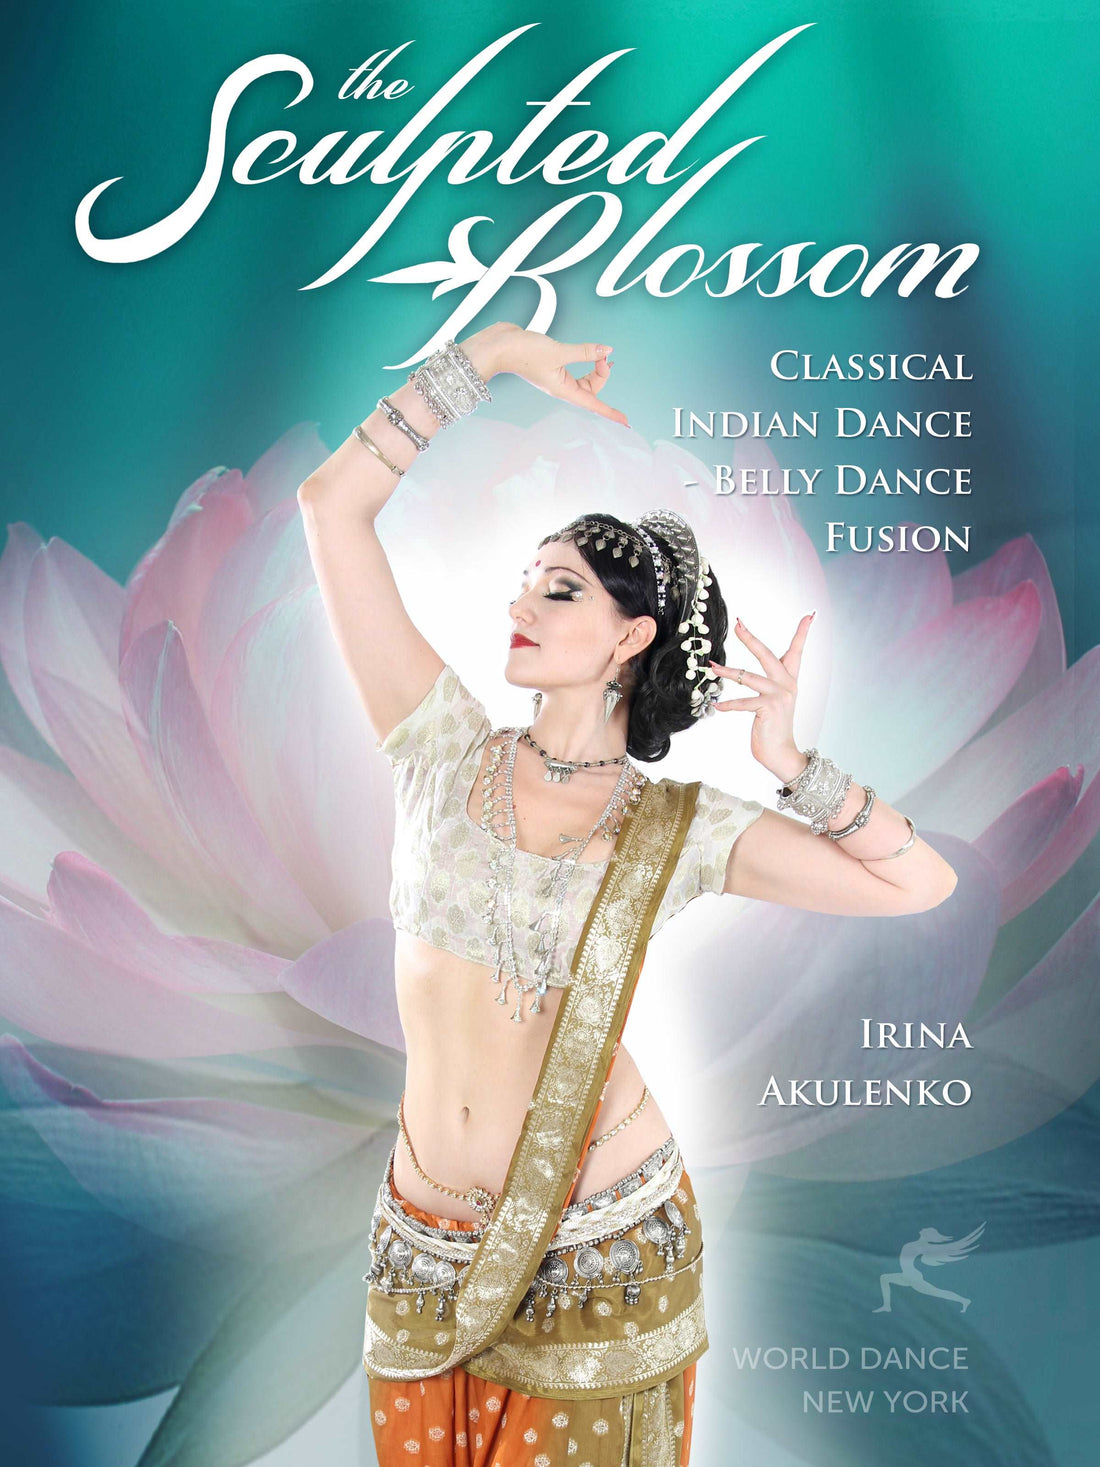 The Sculpted Blossom: Classical Indian Dance - Belly Dance Fusion with Irina Akulenko - INSTANT VIDEO / DVD - World Dance New York